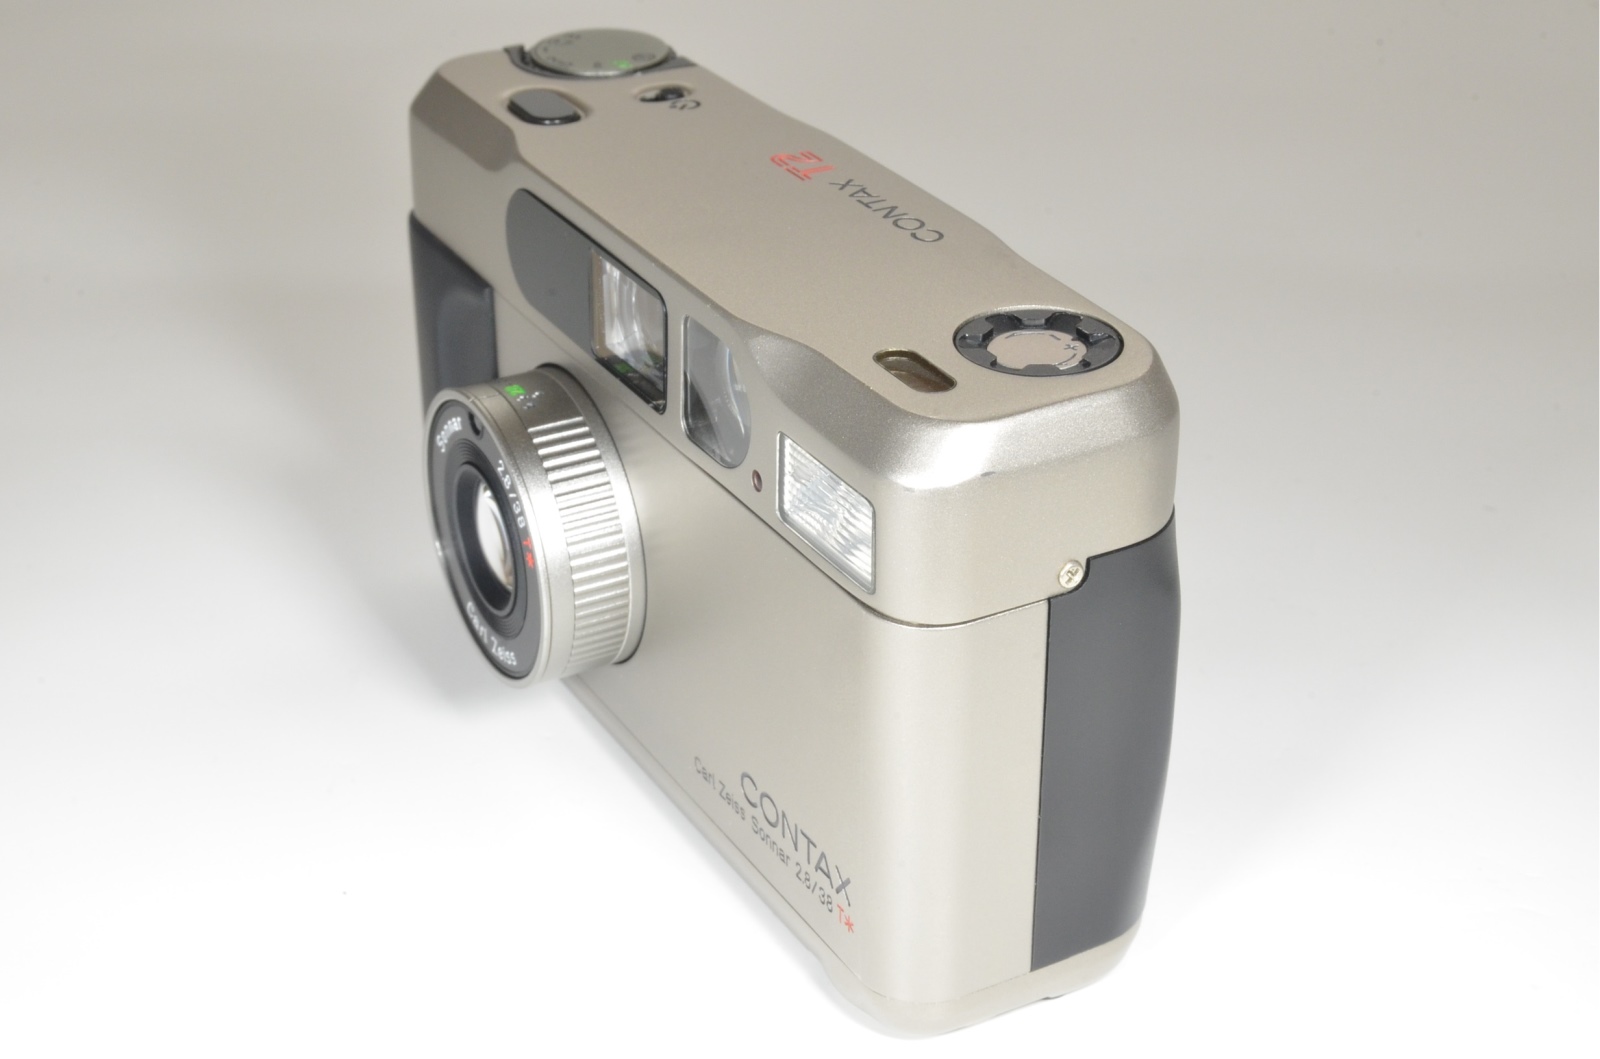 contax t2 titanium silver data back and normal back panel